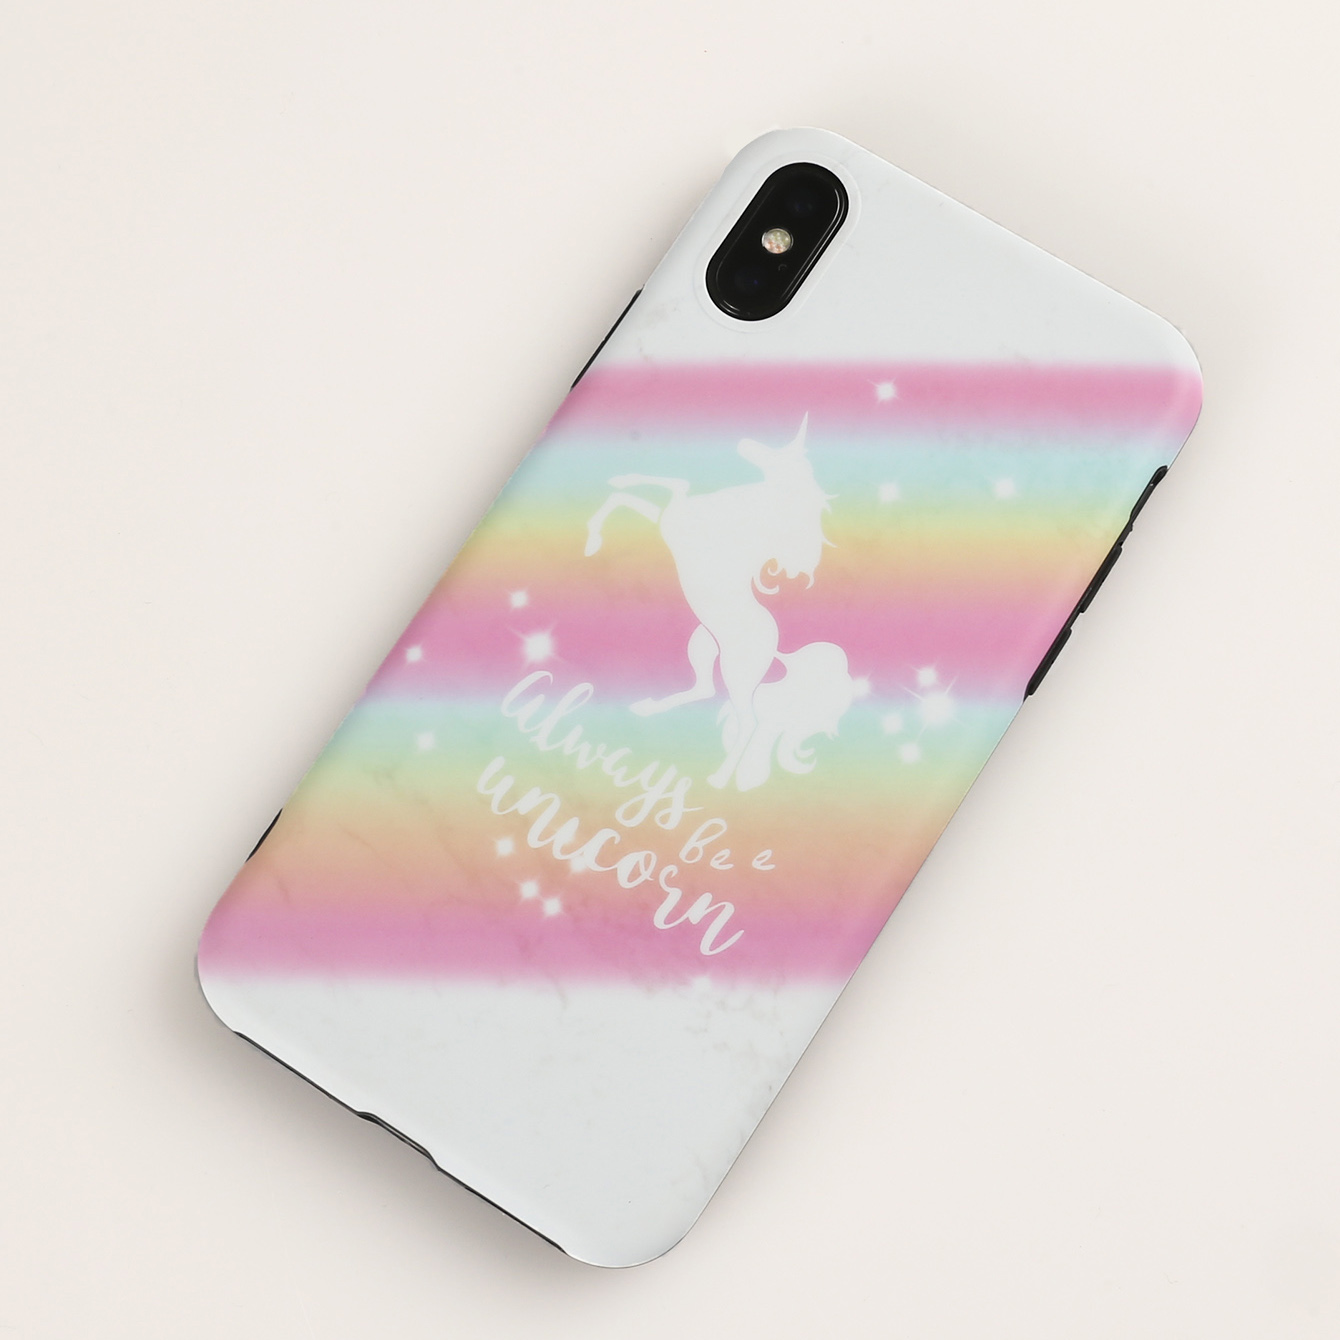 Fashion-Cute-for-iPhone-6-Plus-iP-6S-Plus-Case-Rainbow-Pattern-Hard-Shockproof-Protective-Case-Back--1492427-2